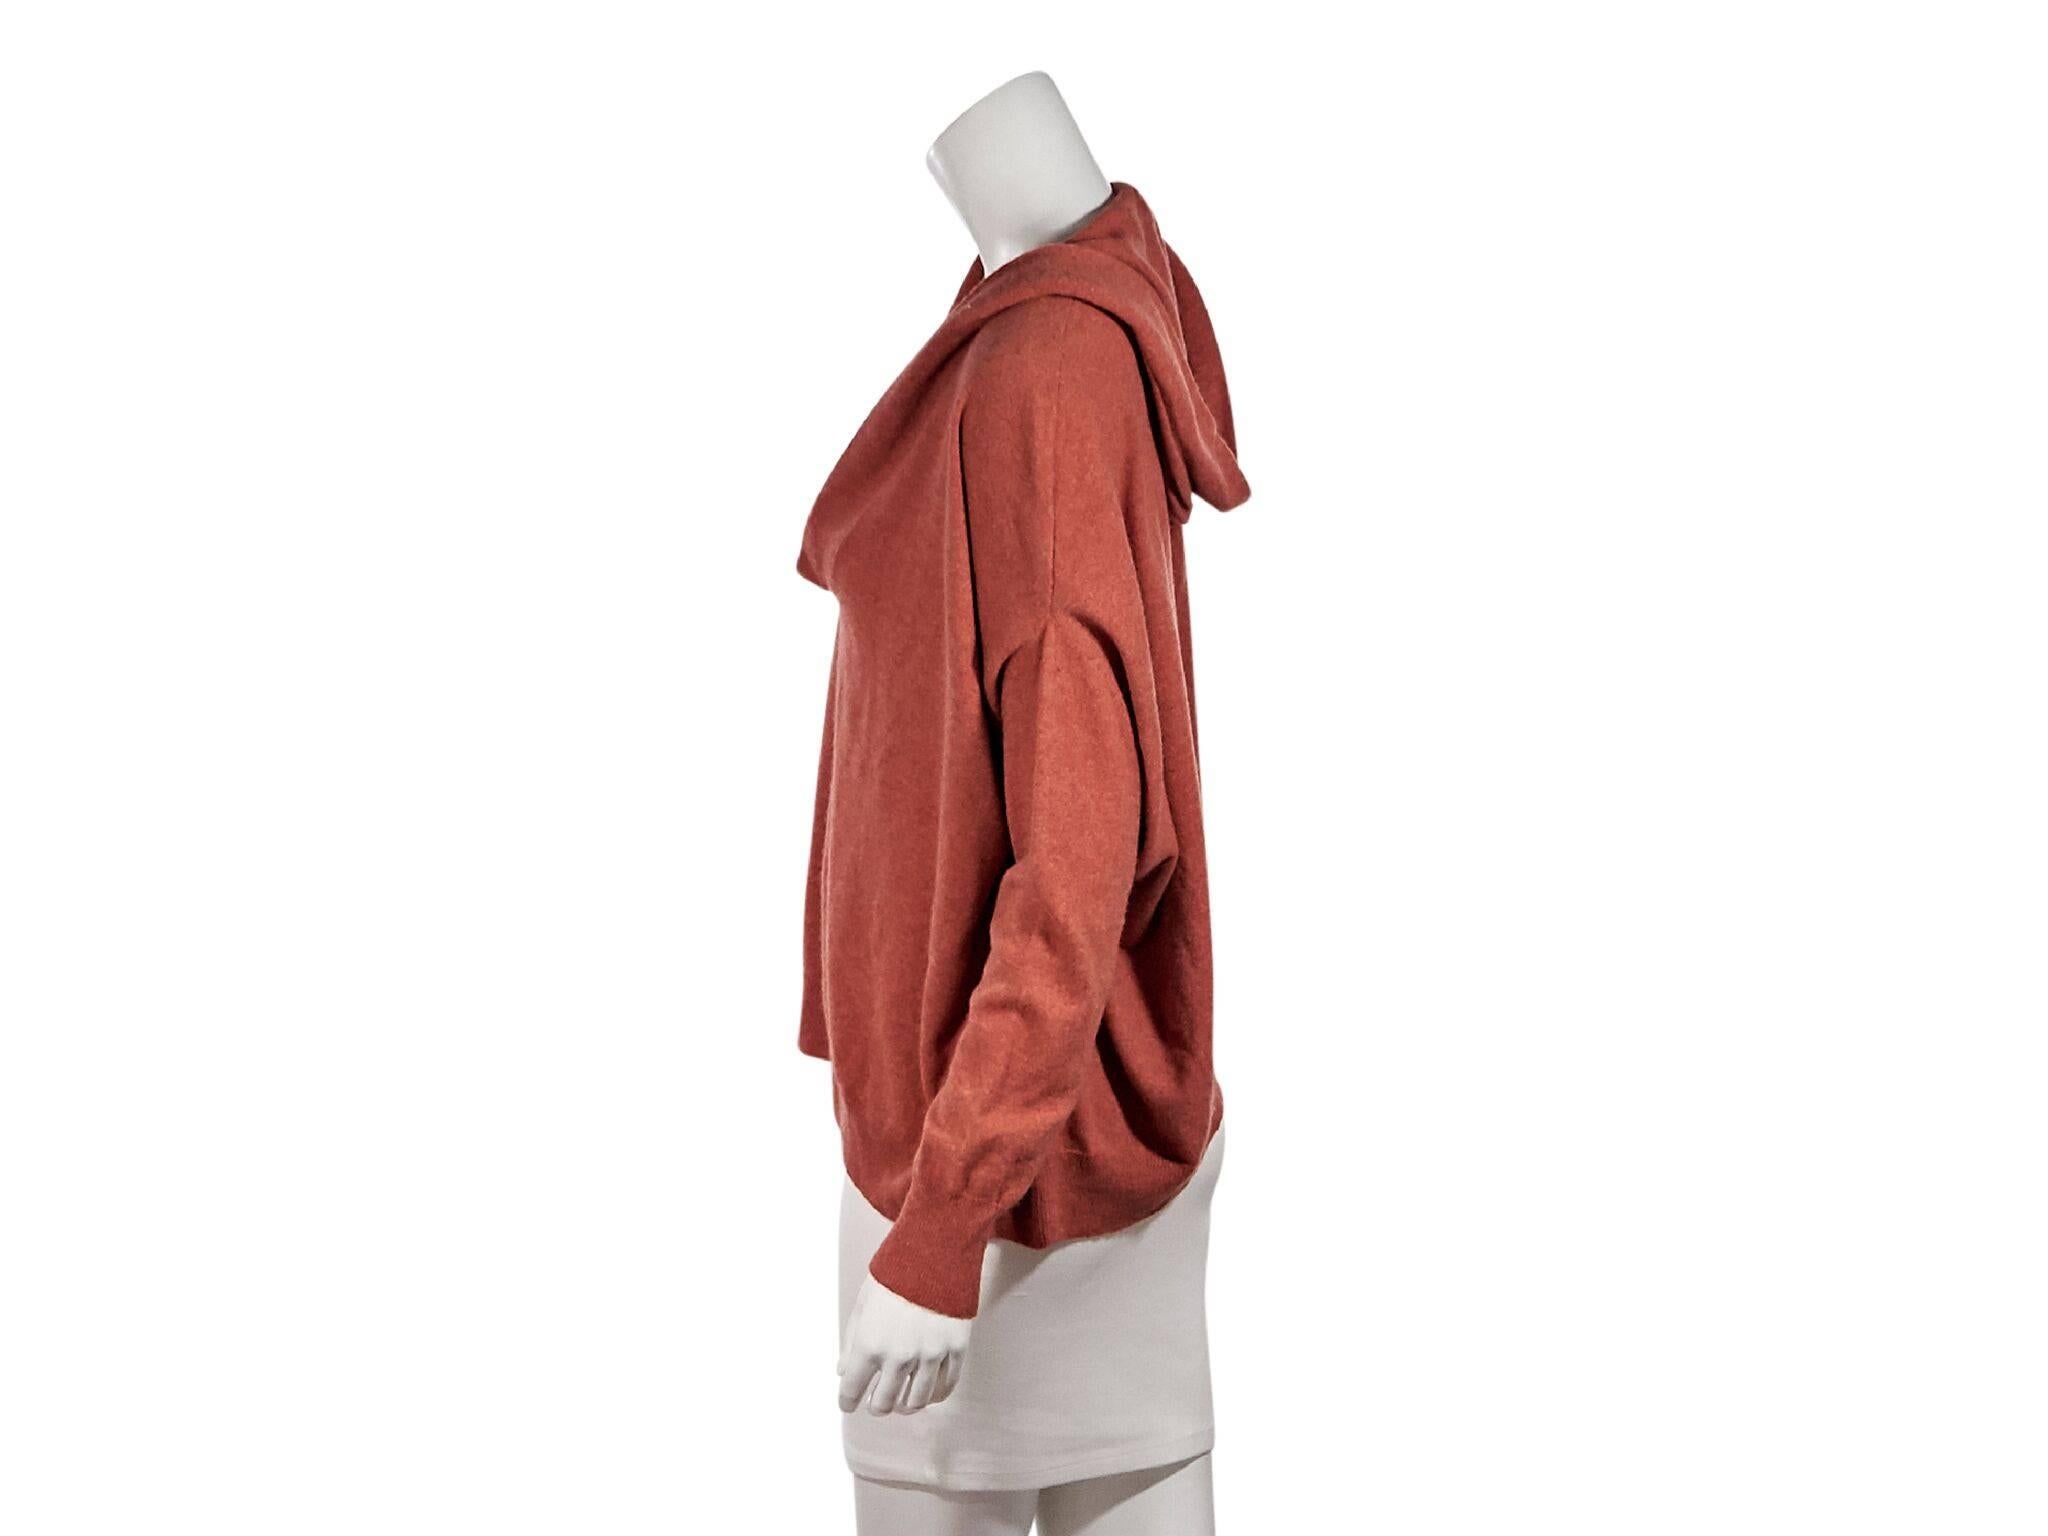 Product details:  Orange cashmere hooded sweater by Brunello Cucinelli.  Oversize fit.  V-neck.  Long dolman sleeves.  Ribbed knit cuffs and hem.  Pullover style.  72